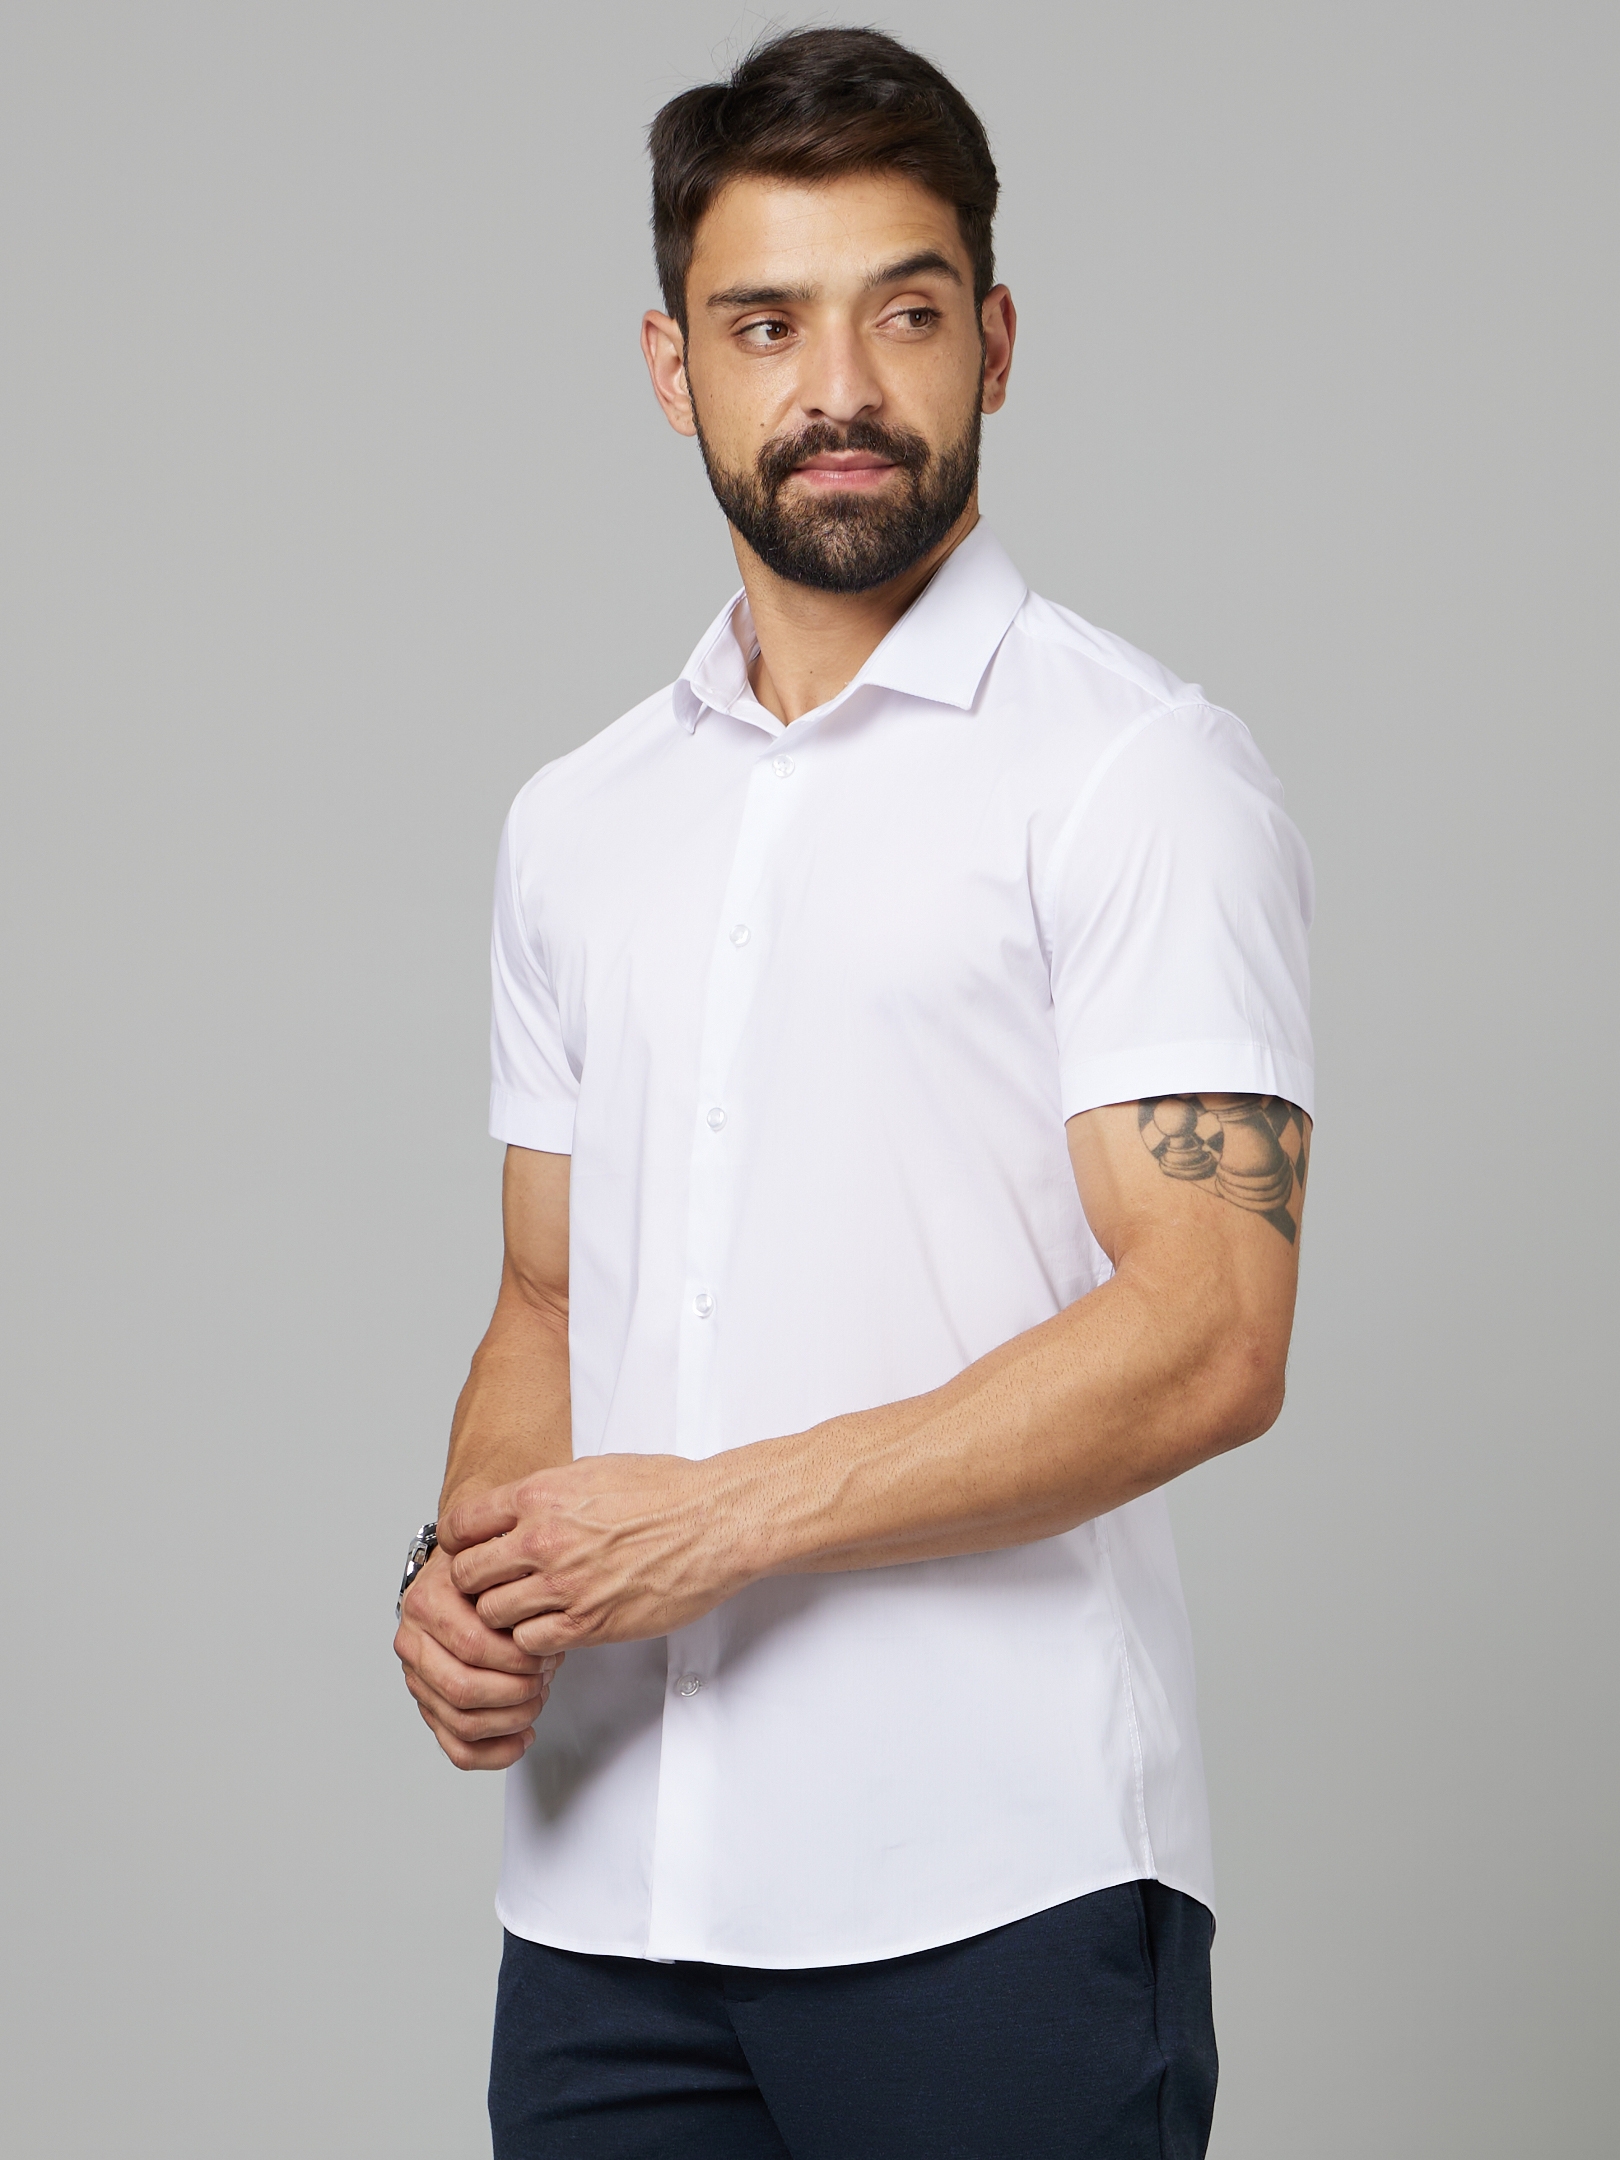 Men's White Solid Casual Shirts